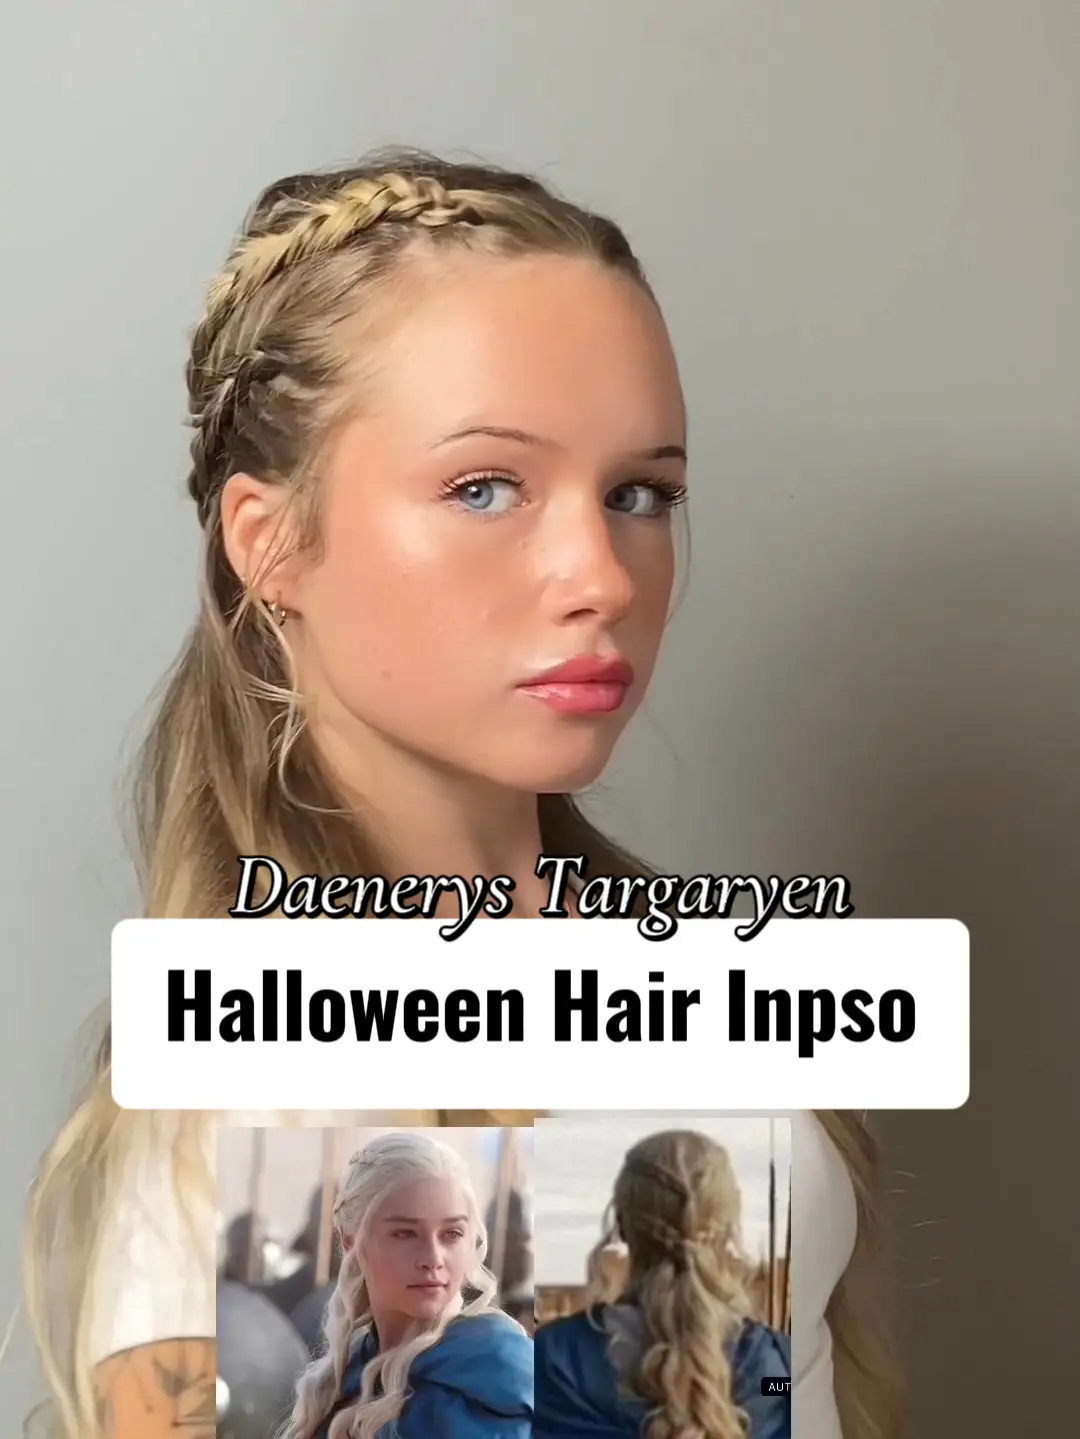 Halloween hair inspo, Video published by brianabappert